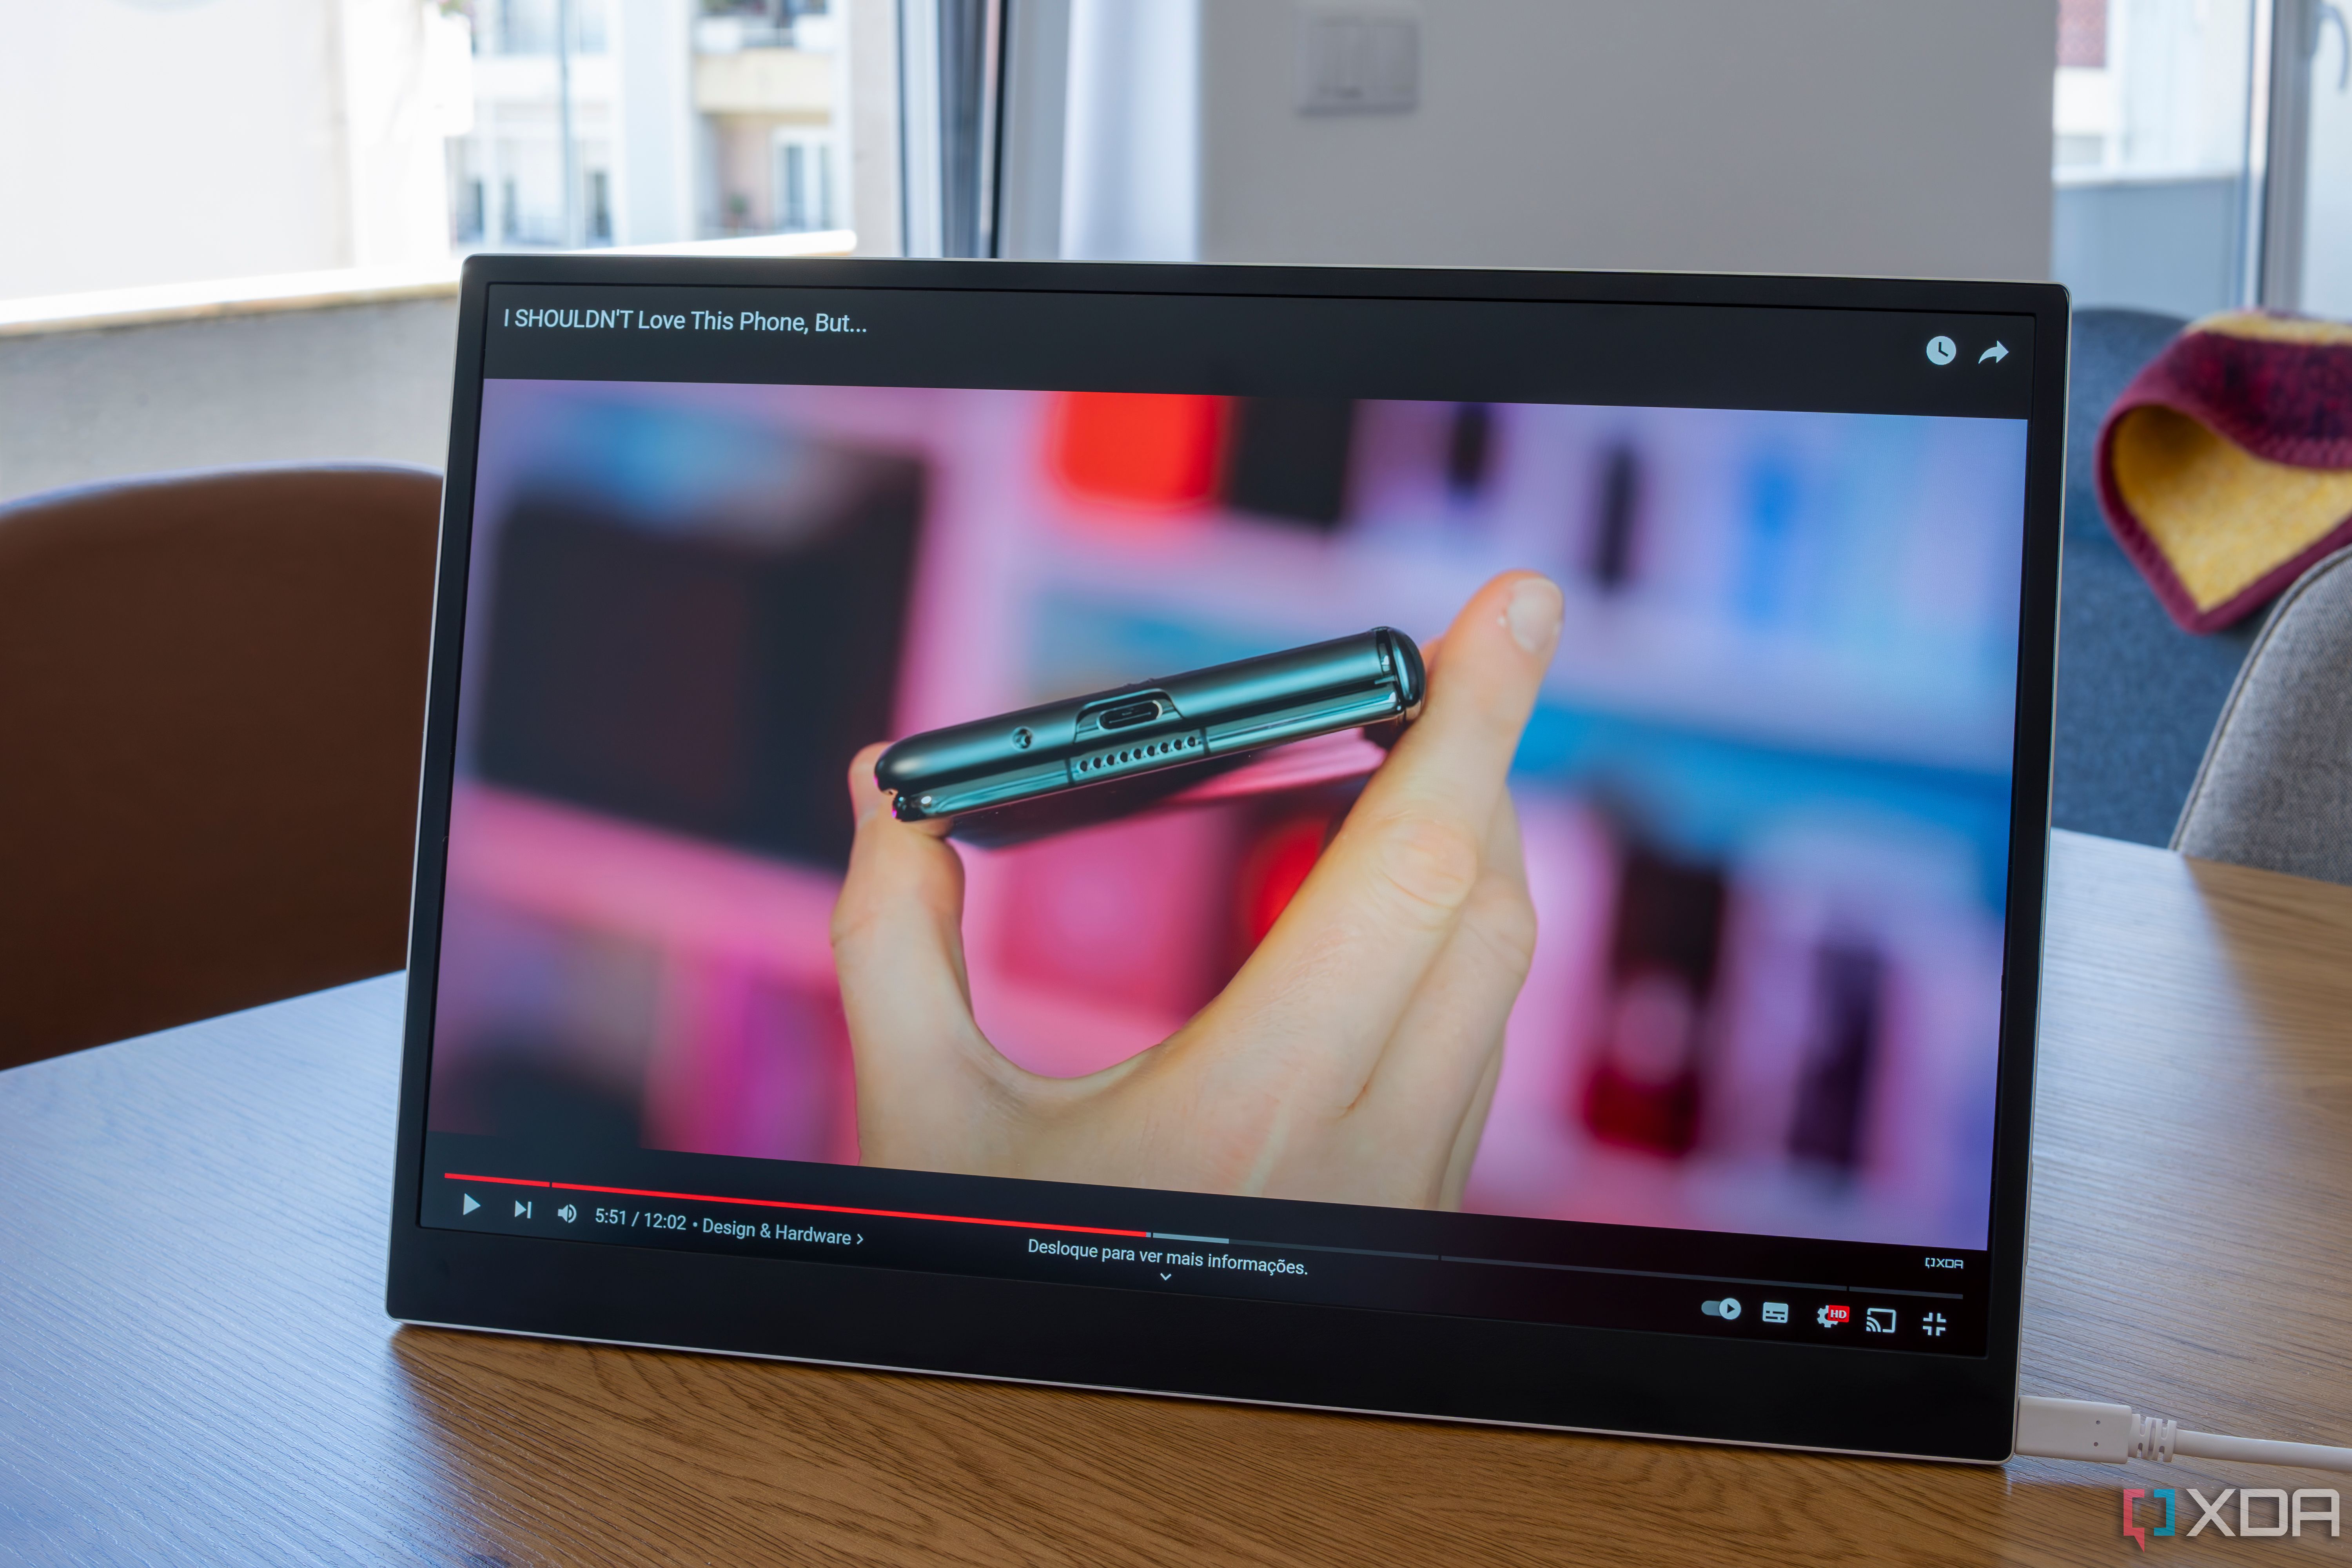 An LG Gram +View playing a YouTube video in full screen